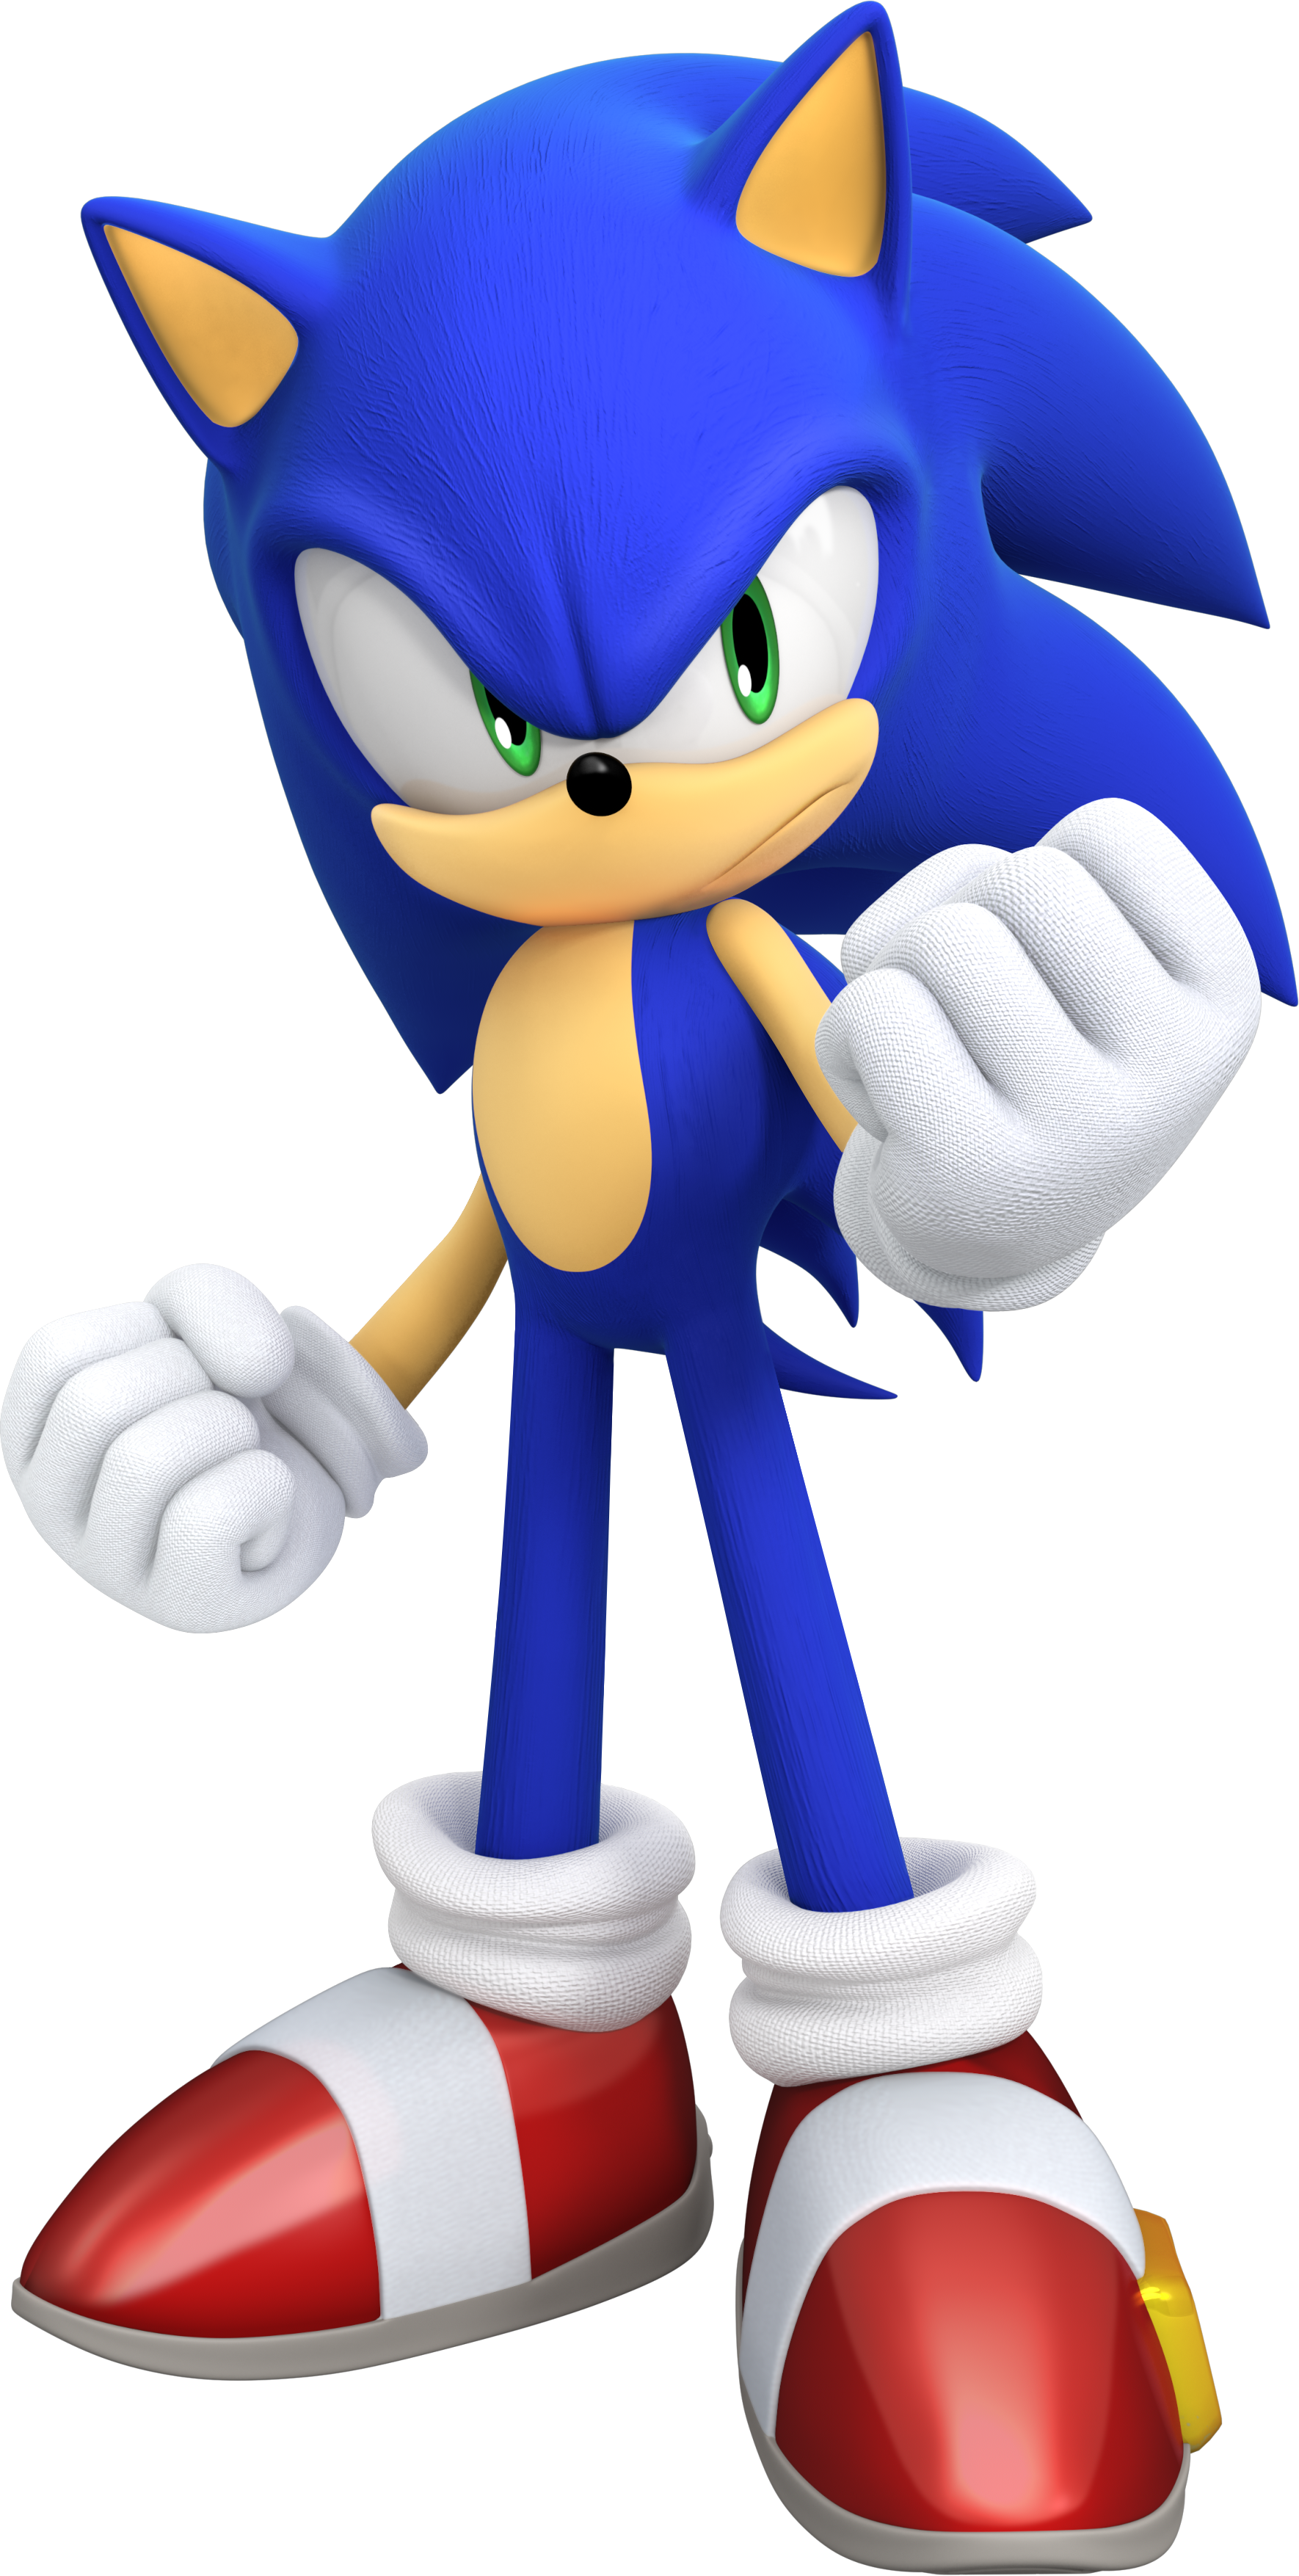 What does Sonic the Hedgehog do?